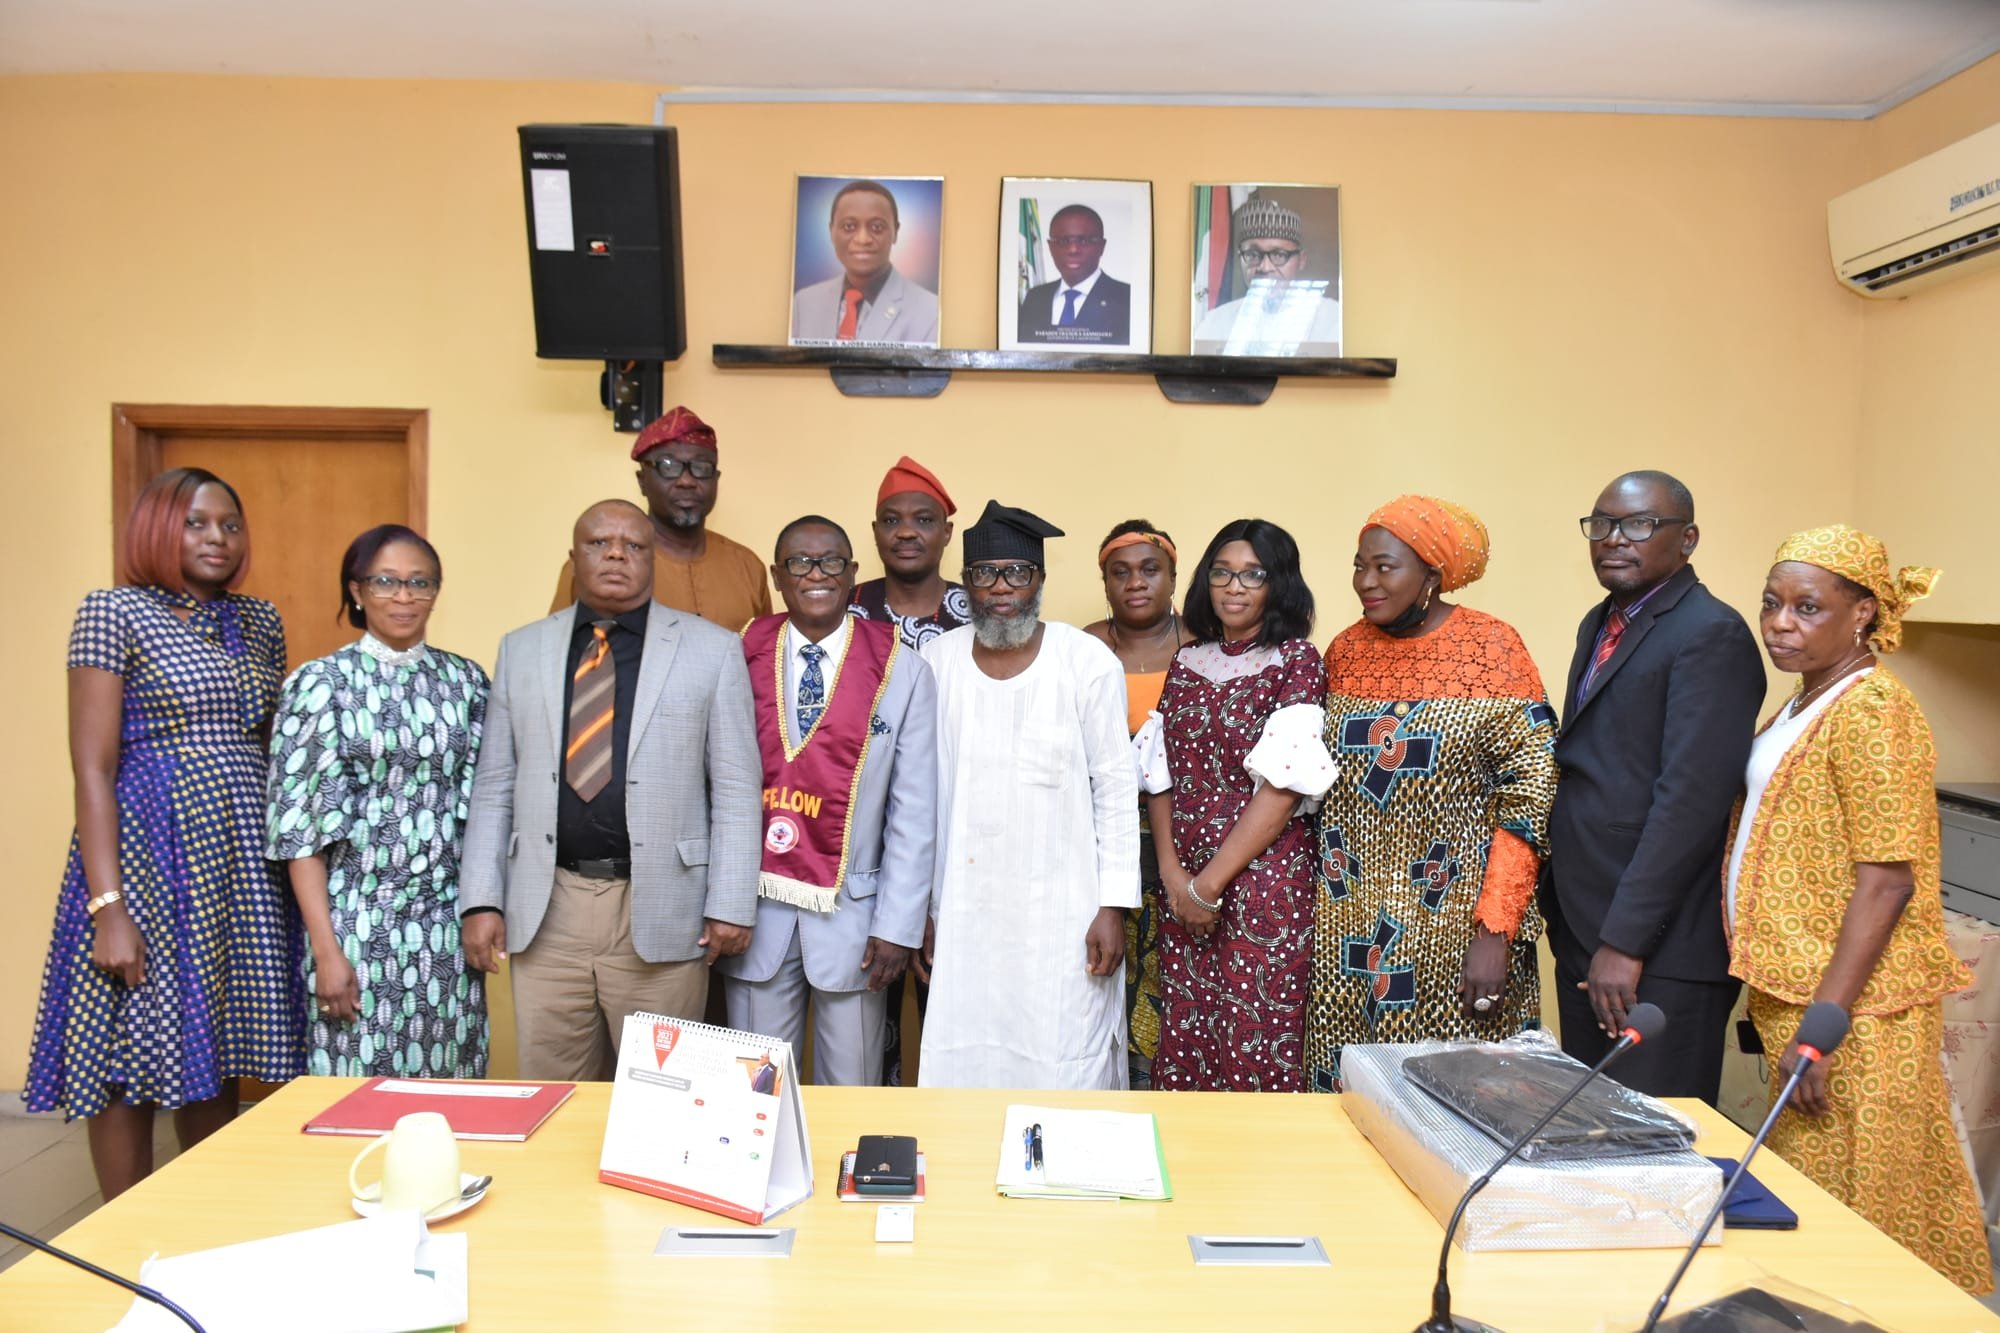 DG-PSSDC expresses readiness for strategic institutional collaborations, partnerships